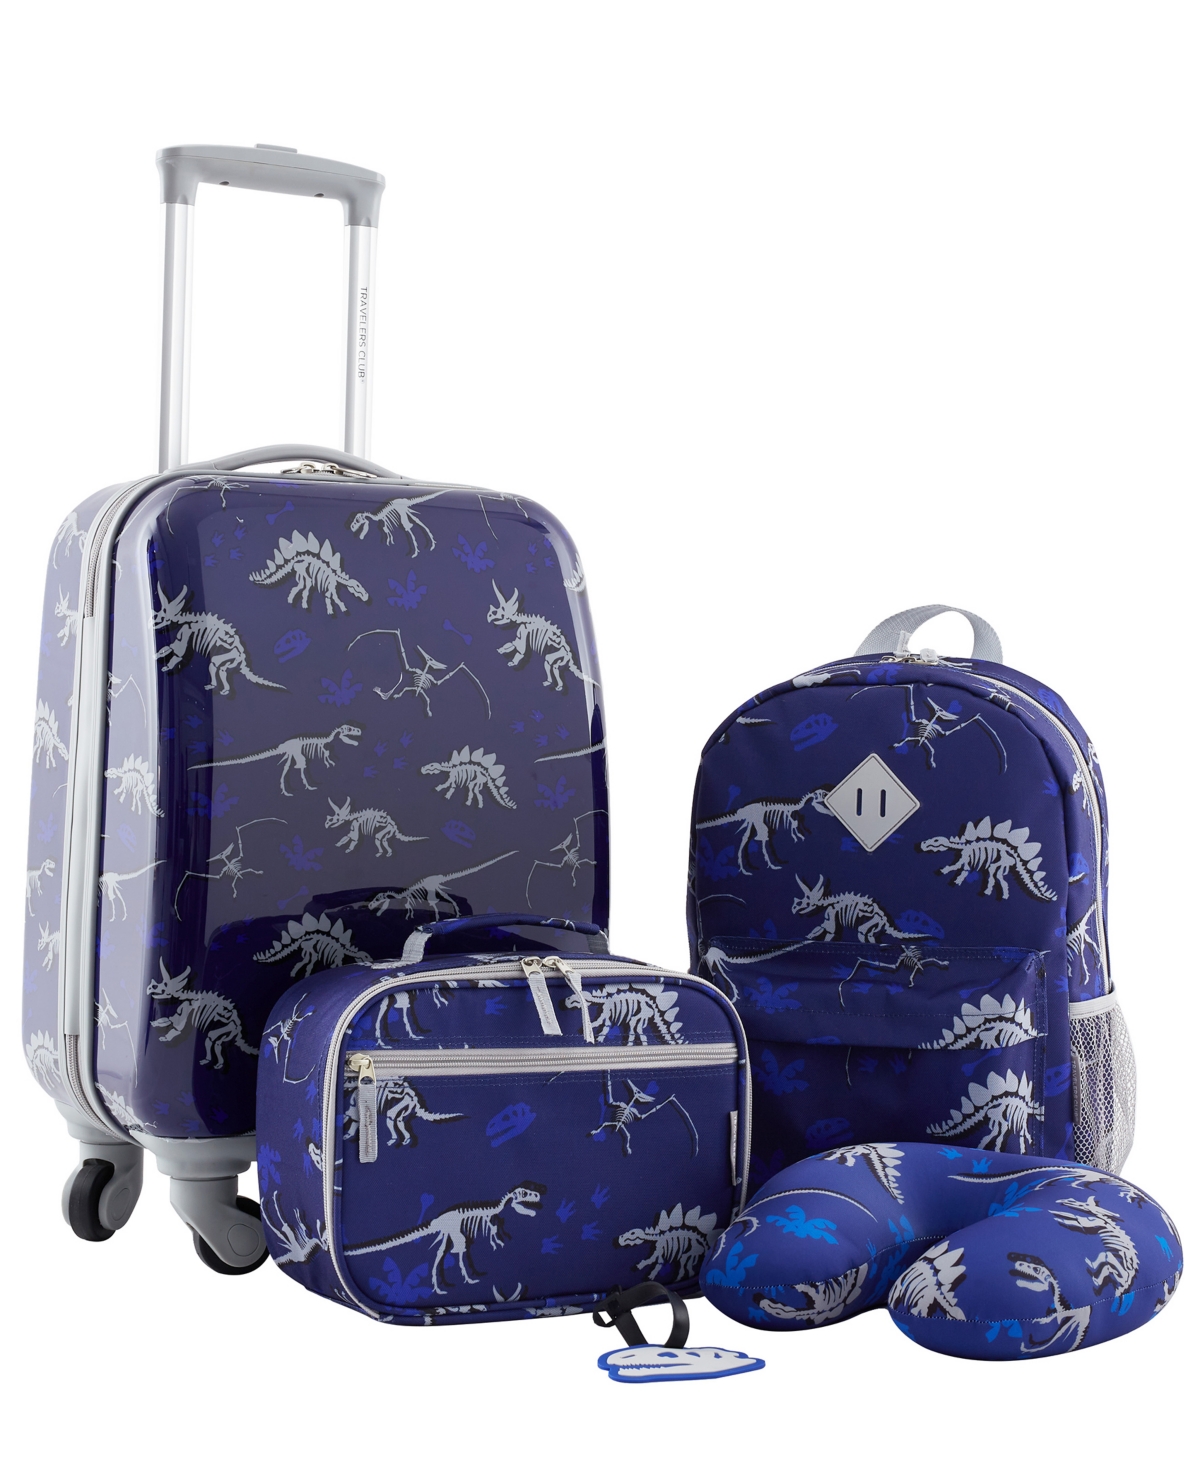 Travelers Club Kid's Hard Side Carry-on Spinner 5 Piece Luggage Set In Dino Skele